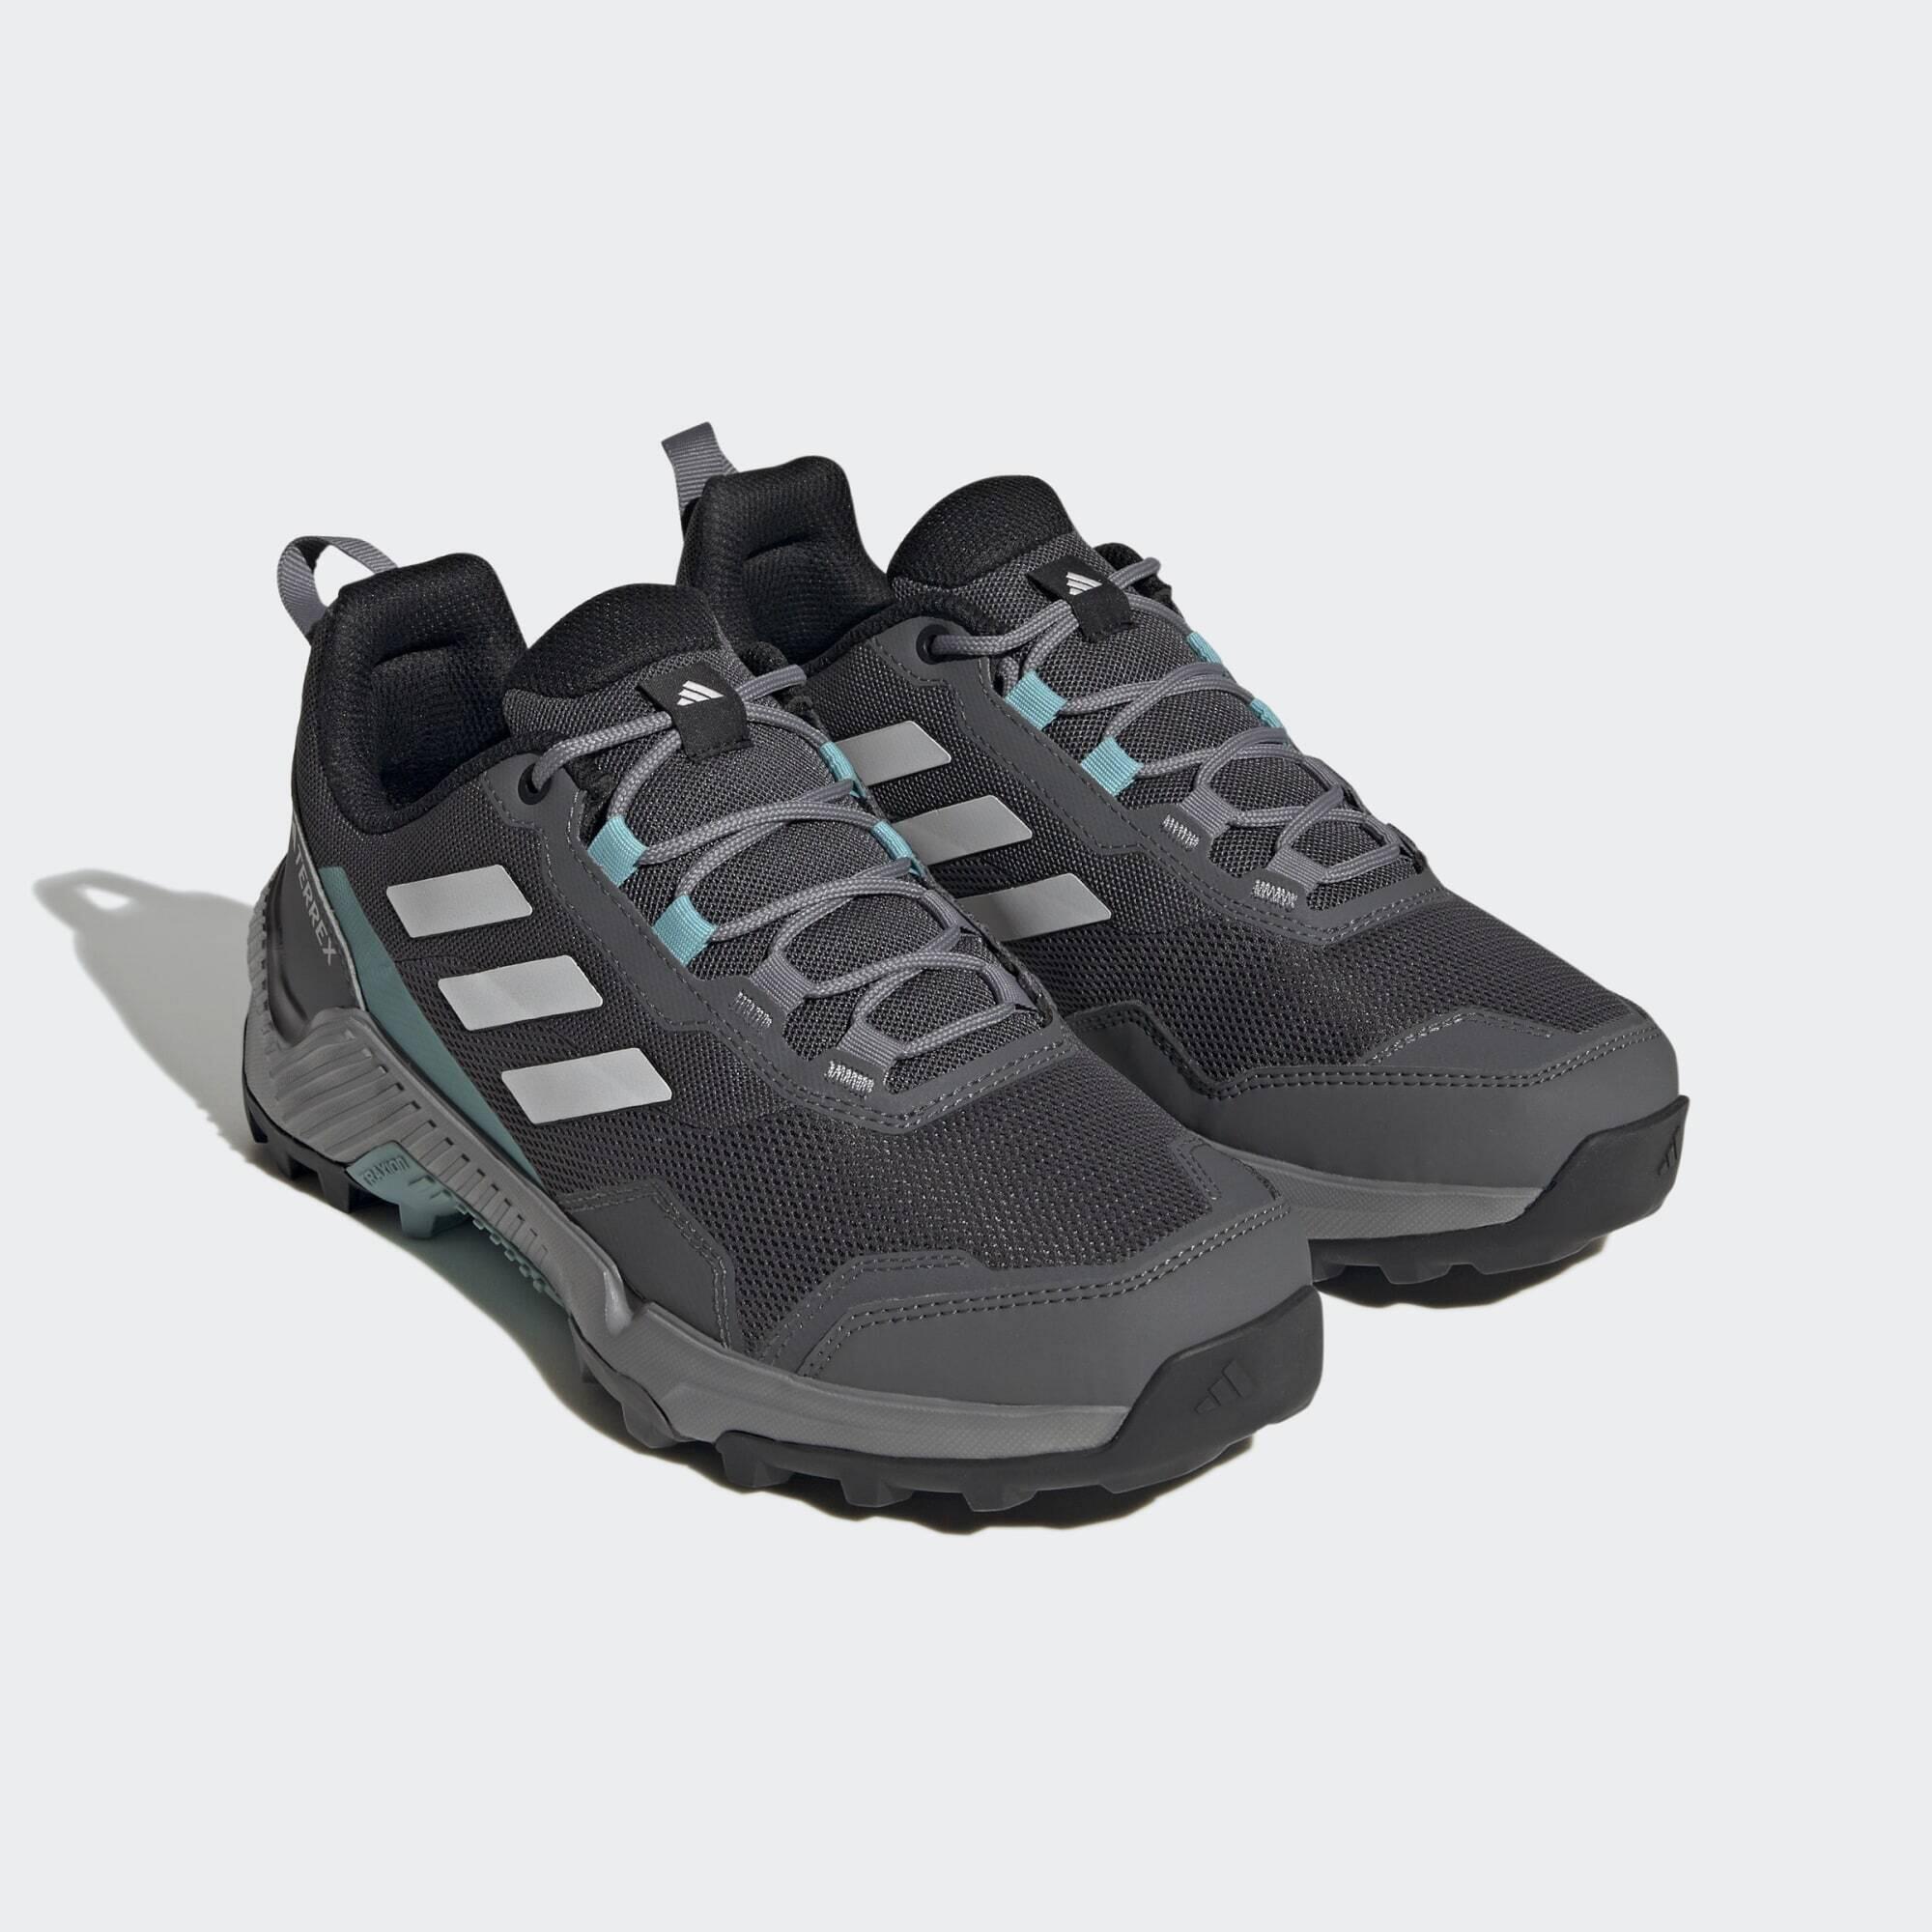 Eastrail 2.0 Hiking Shoes 5/7